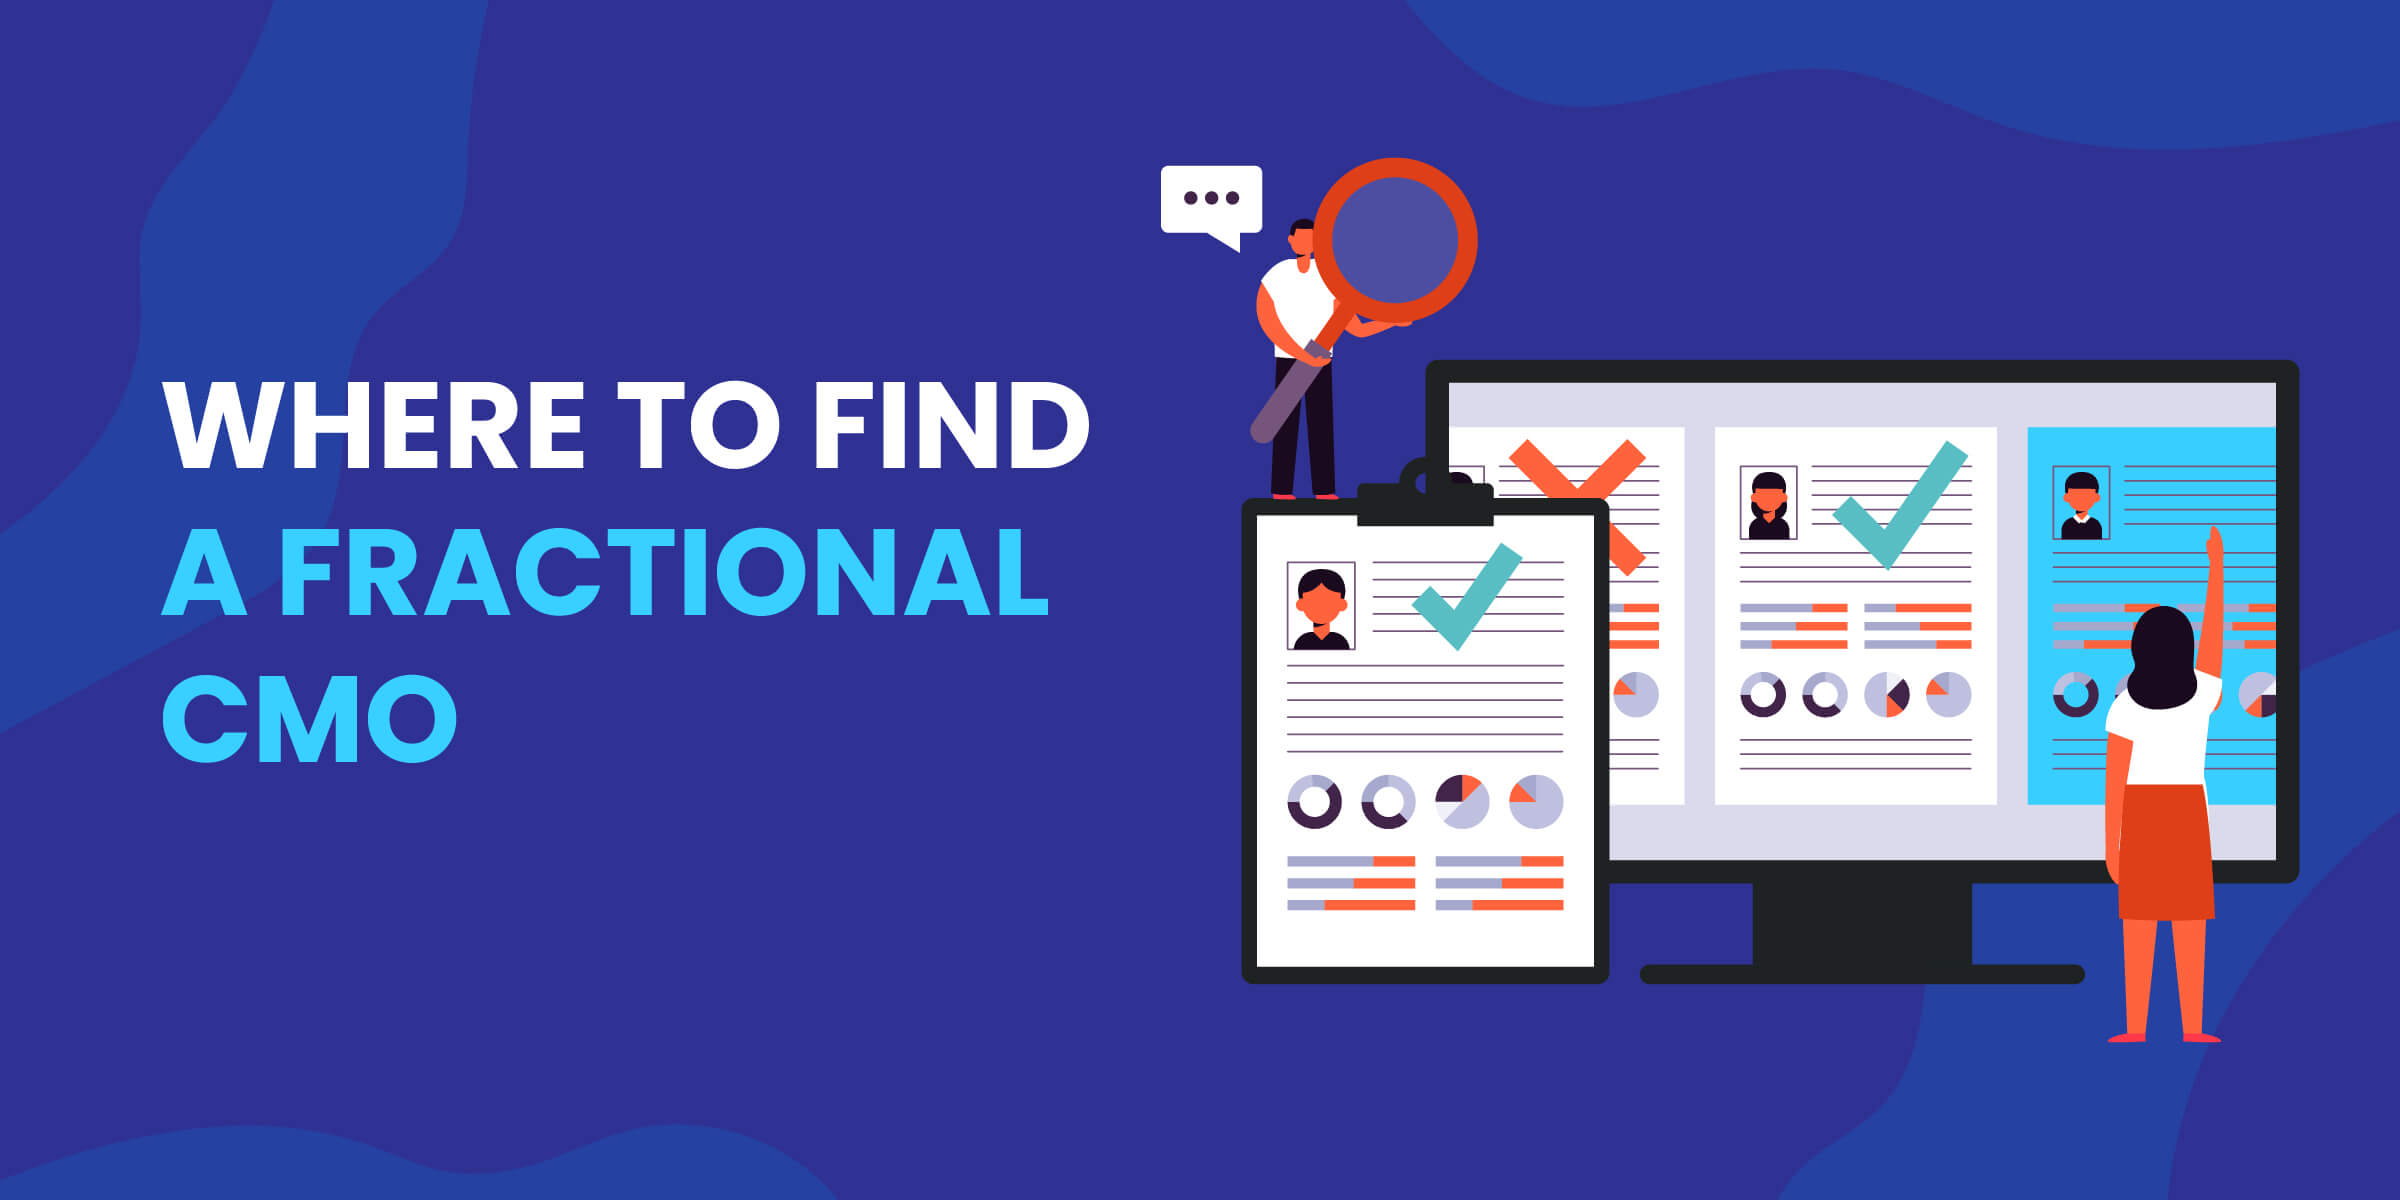 Where to Find Fractional CMO